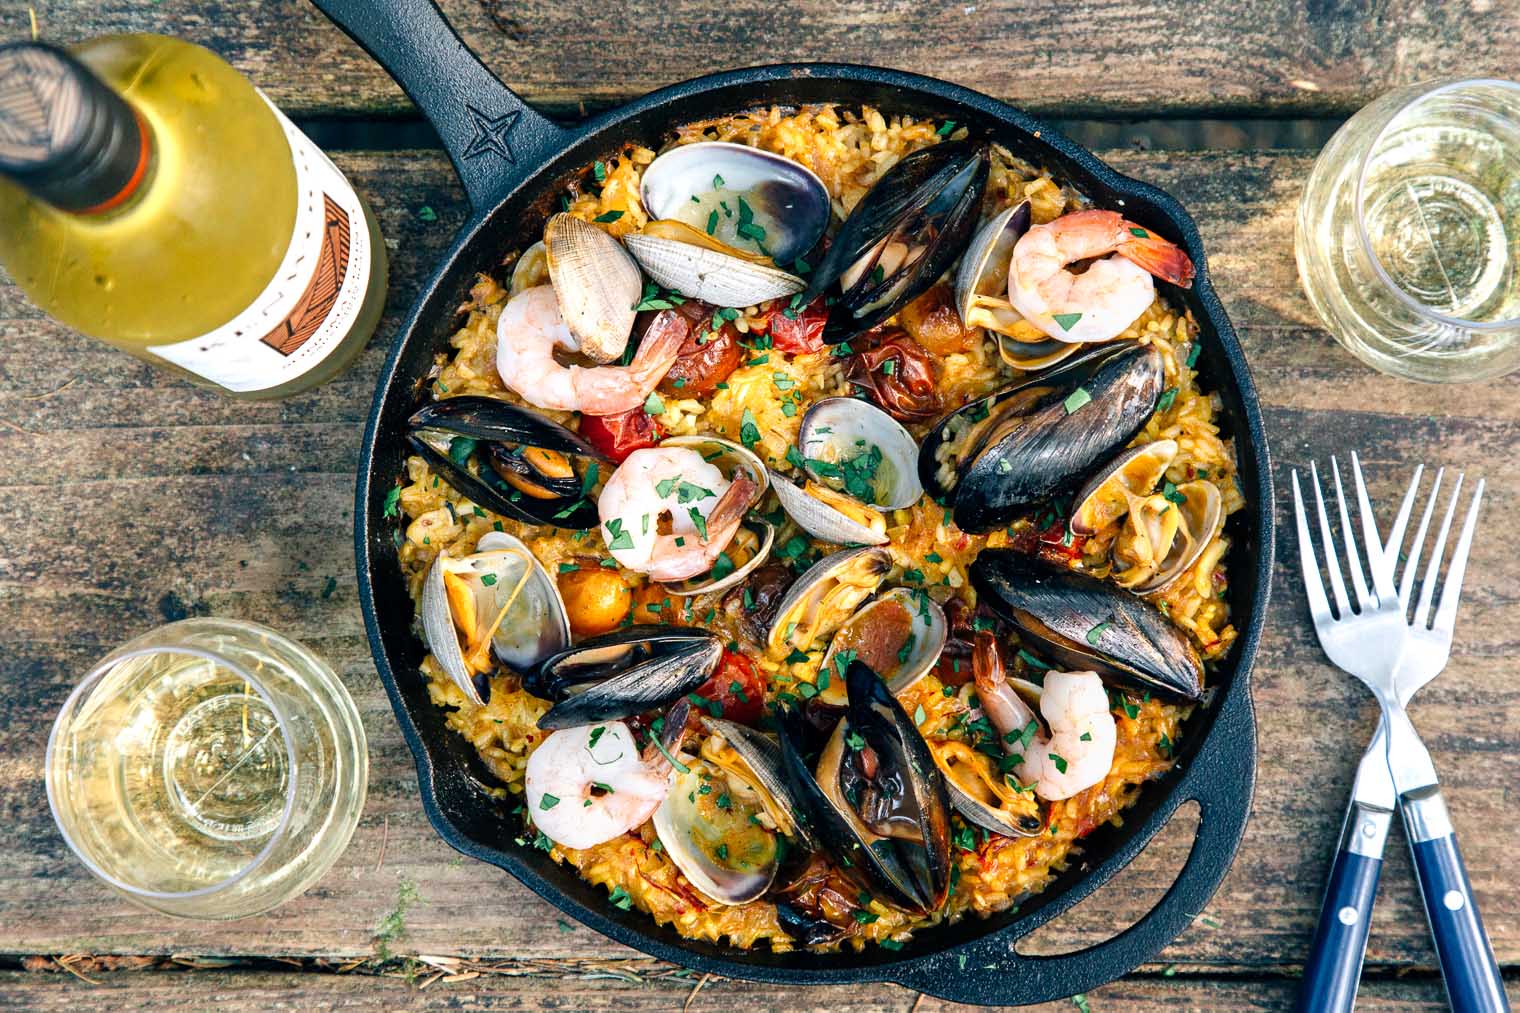 Paella in a skillet on a camping table with forks and a bottle of wine in frame